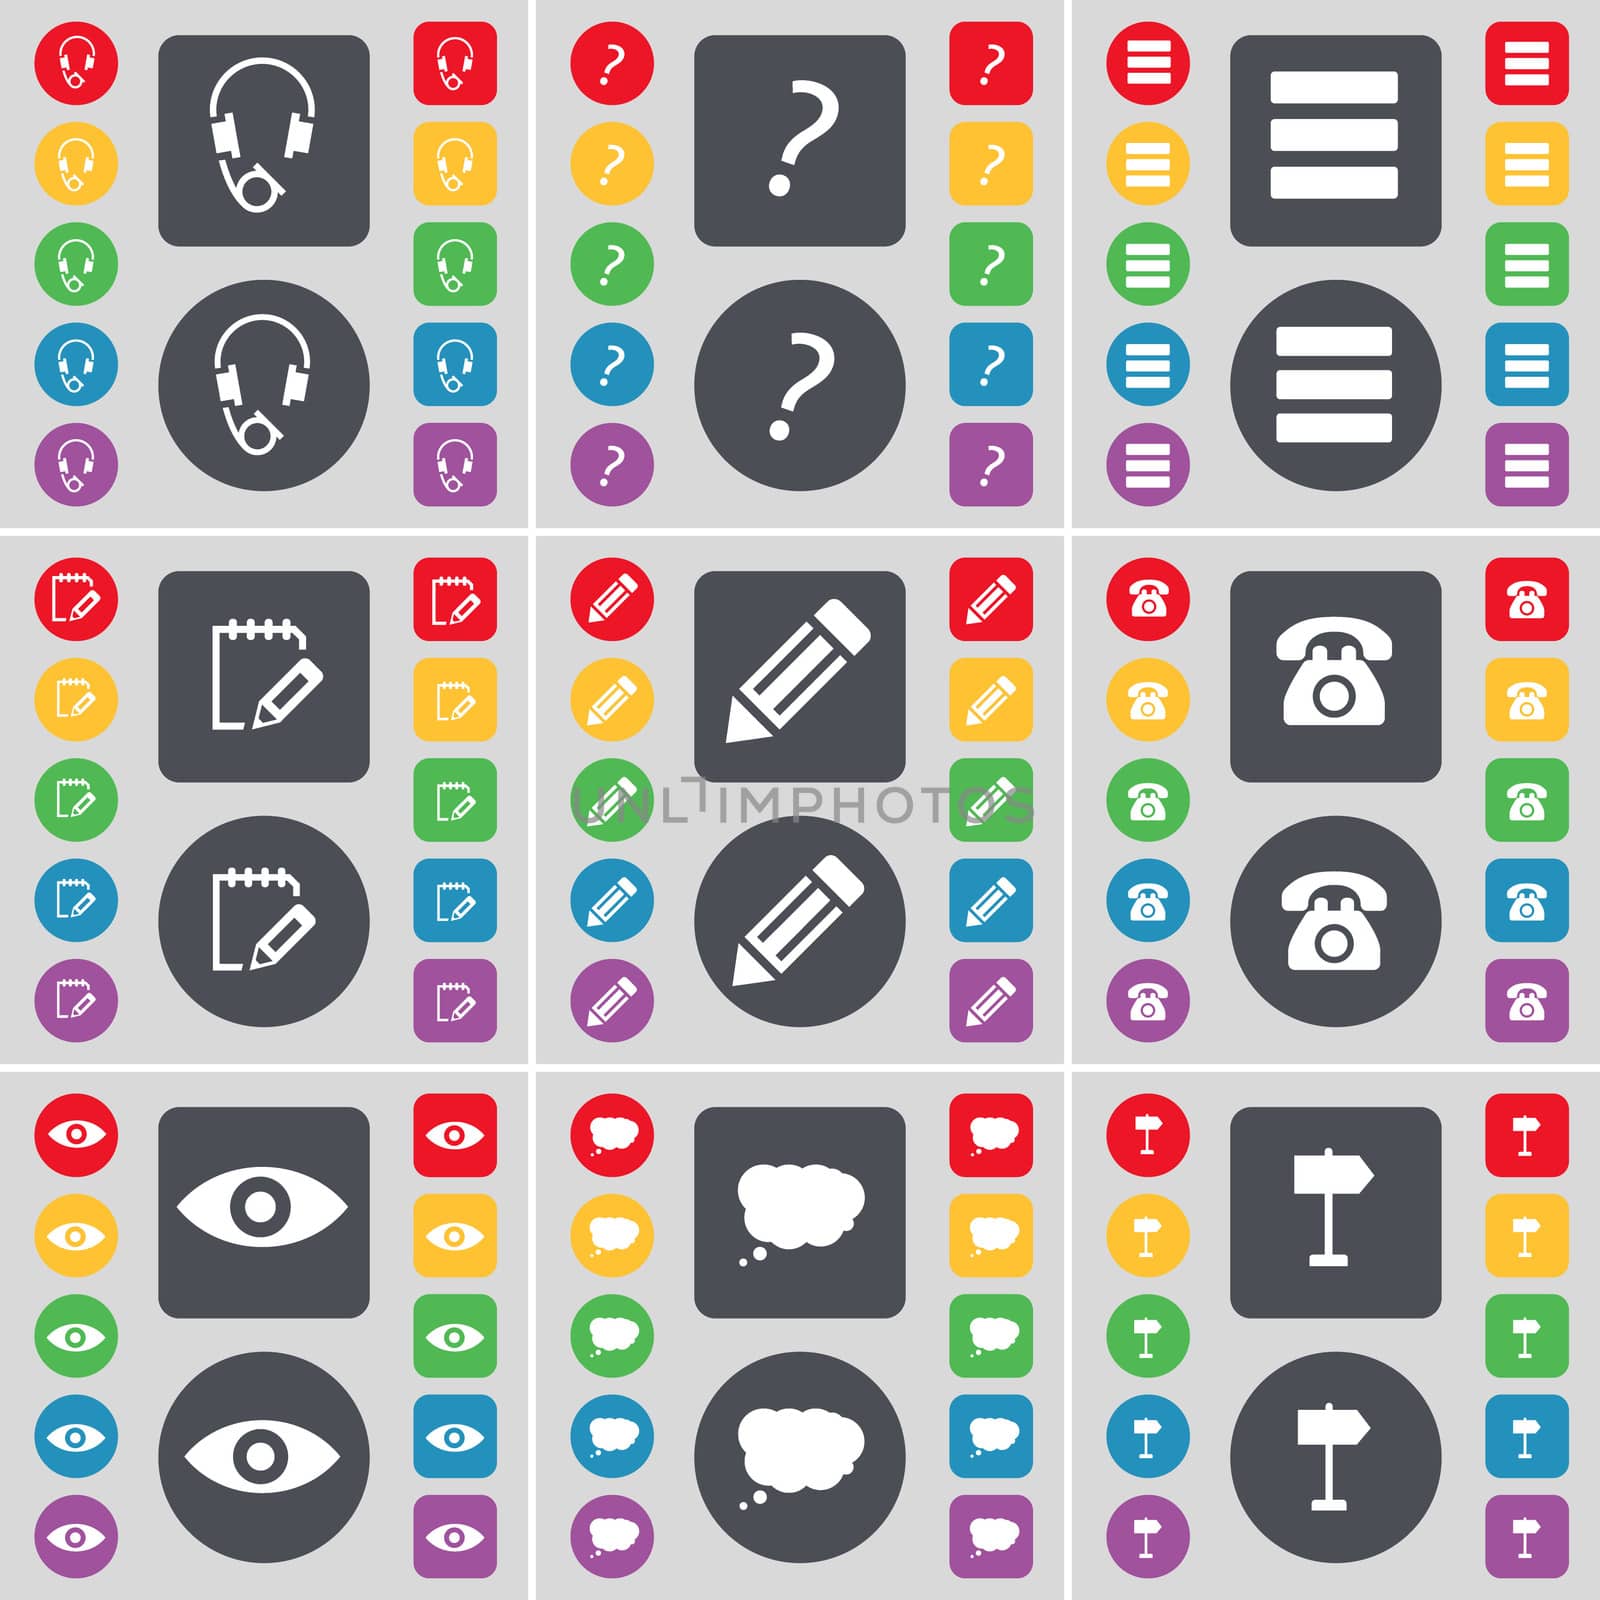 Headphones, Question mark, Apps, Notebook, Pencil, Retro phone, Vision, Chat cloud, Signpost icon symbol. A large set of flat, colored buttons for your design. illustration